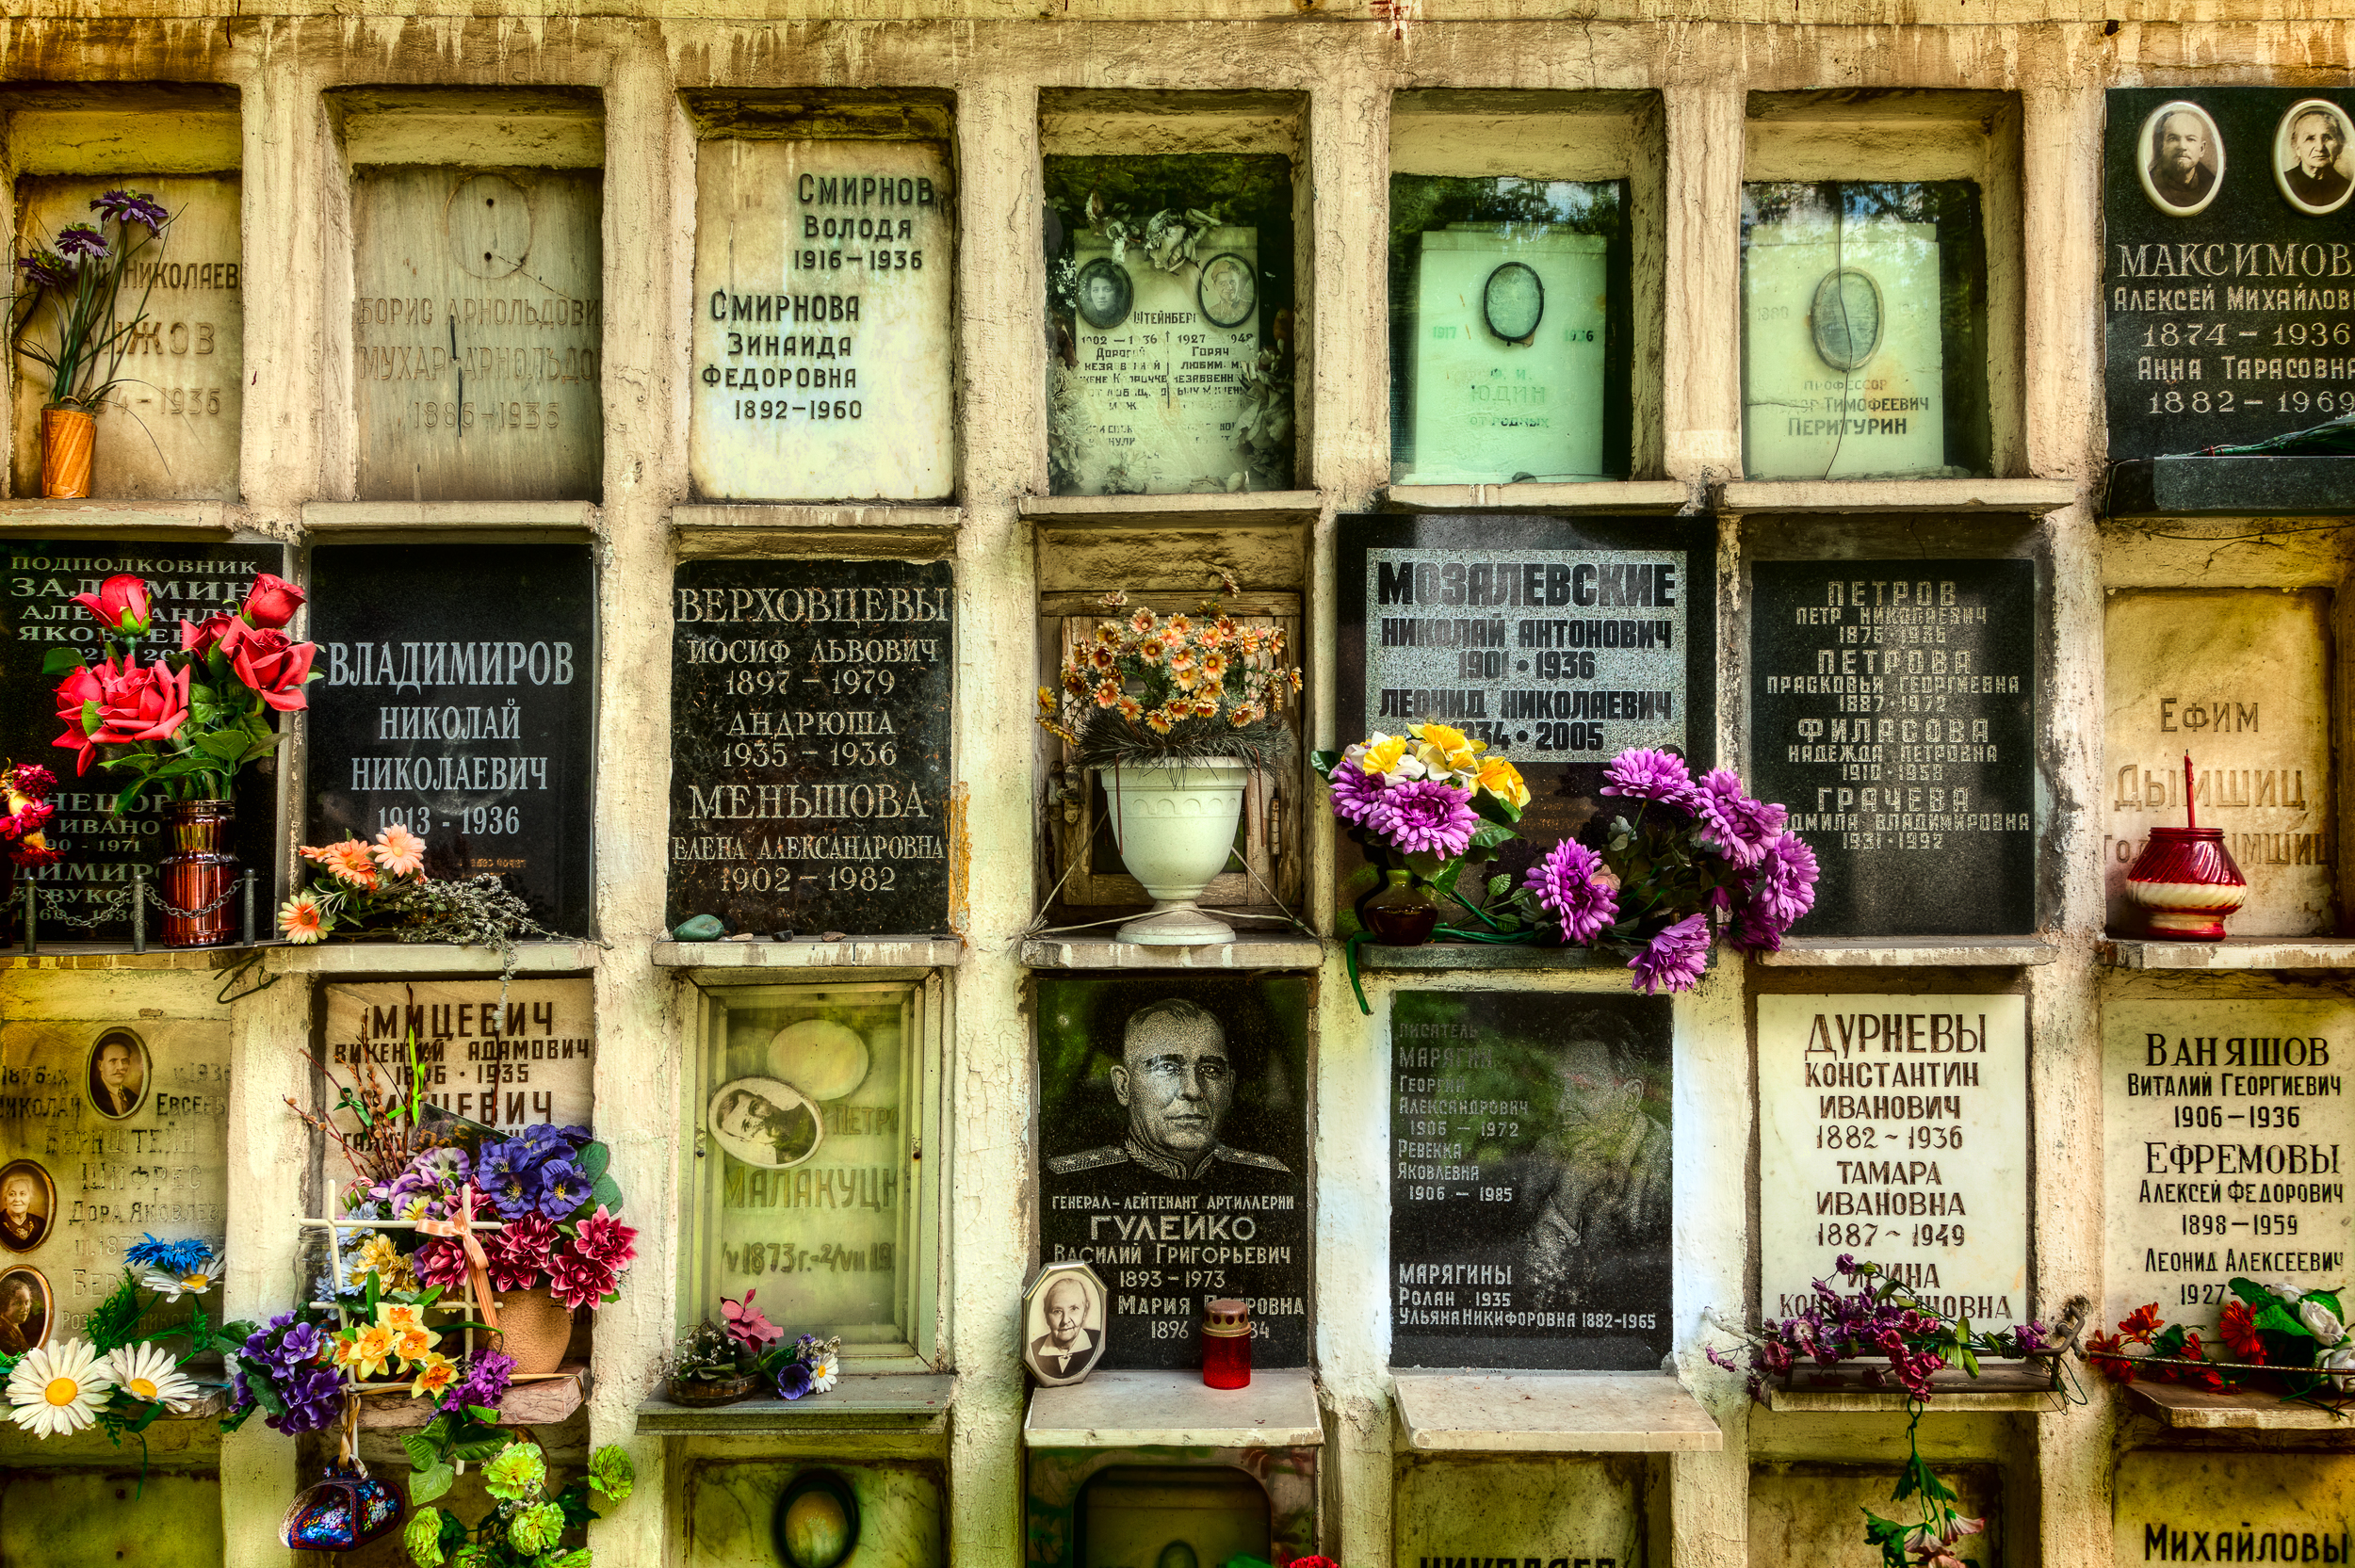 Tiny niche's holding plaques and flowers in the grounds of Novodevichy Cemetery in Moscow, Russia .